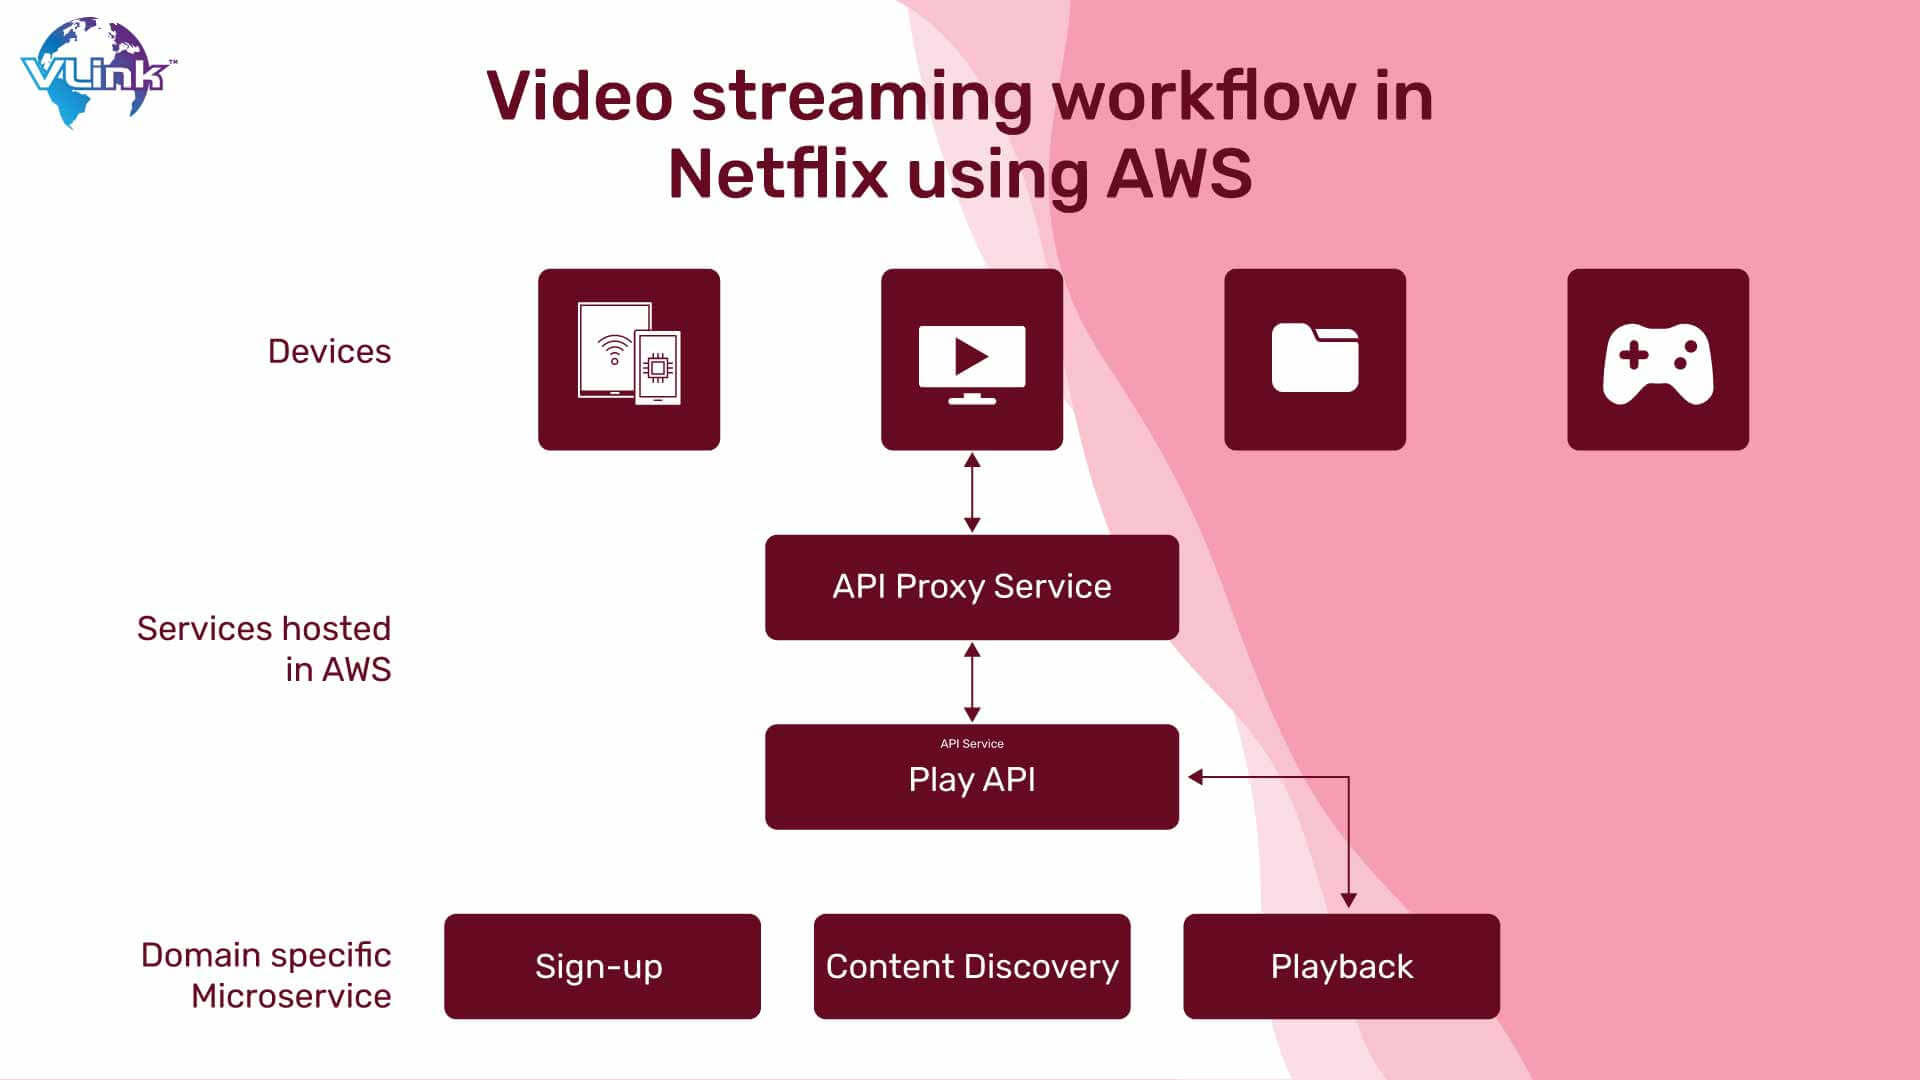 Video streaming workflow in Netflix using AWS